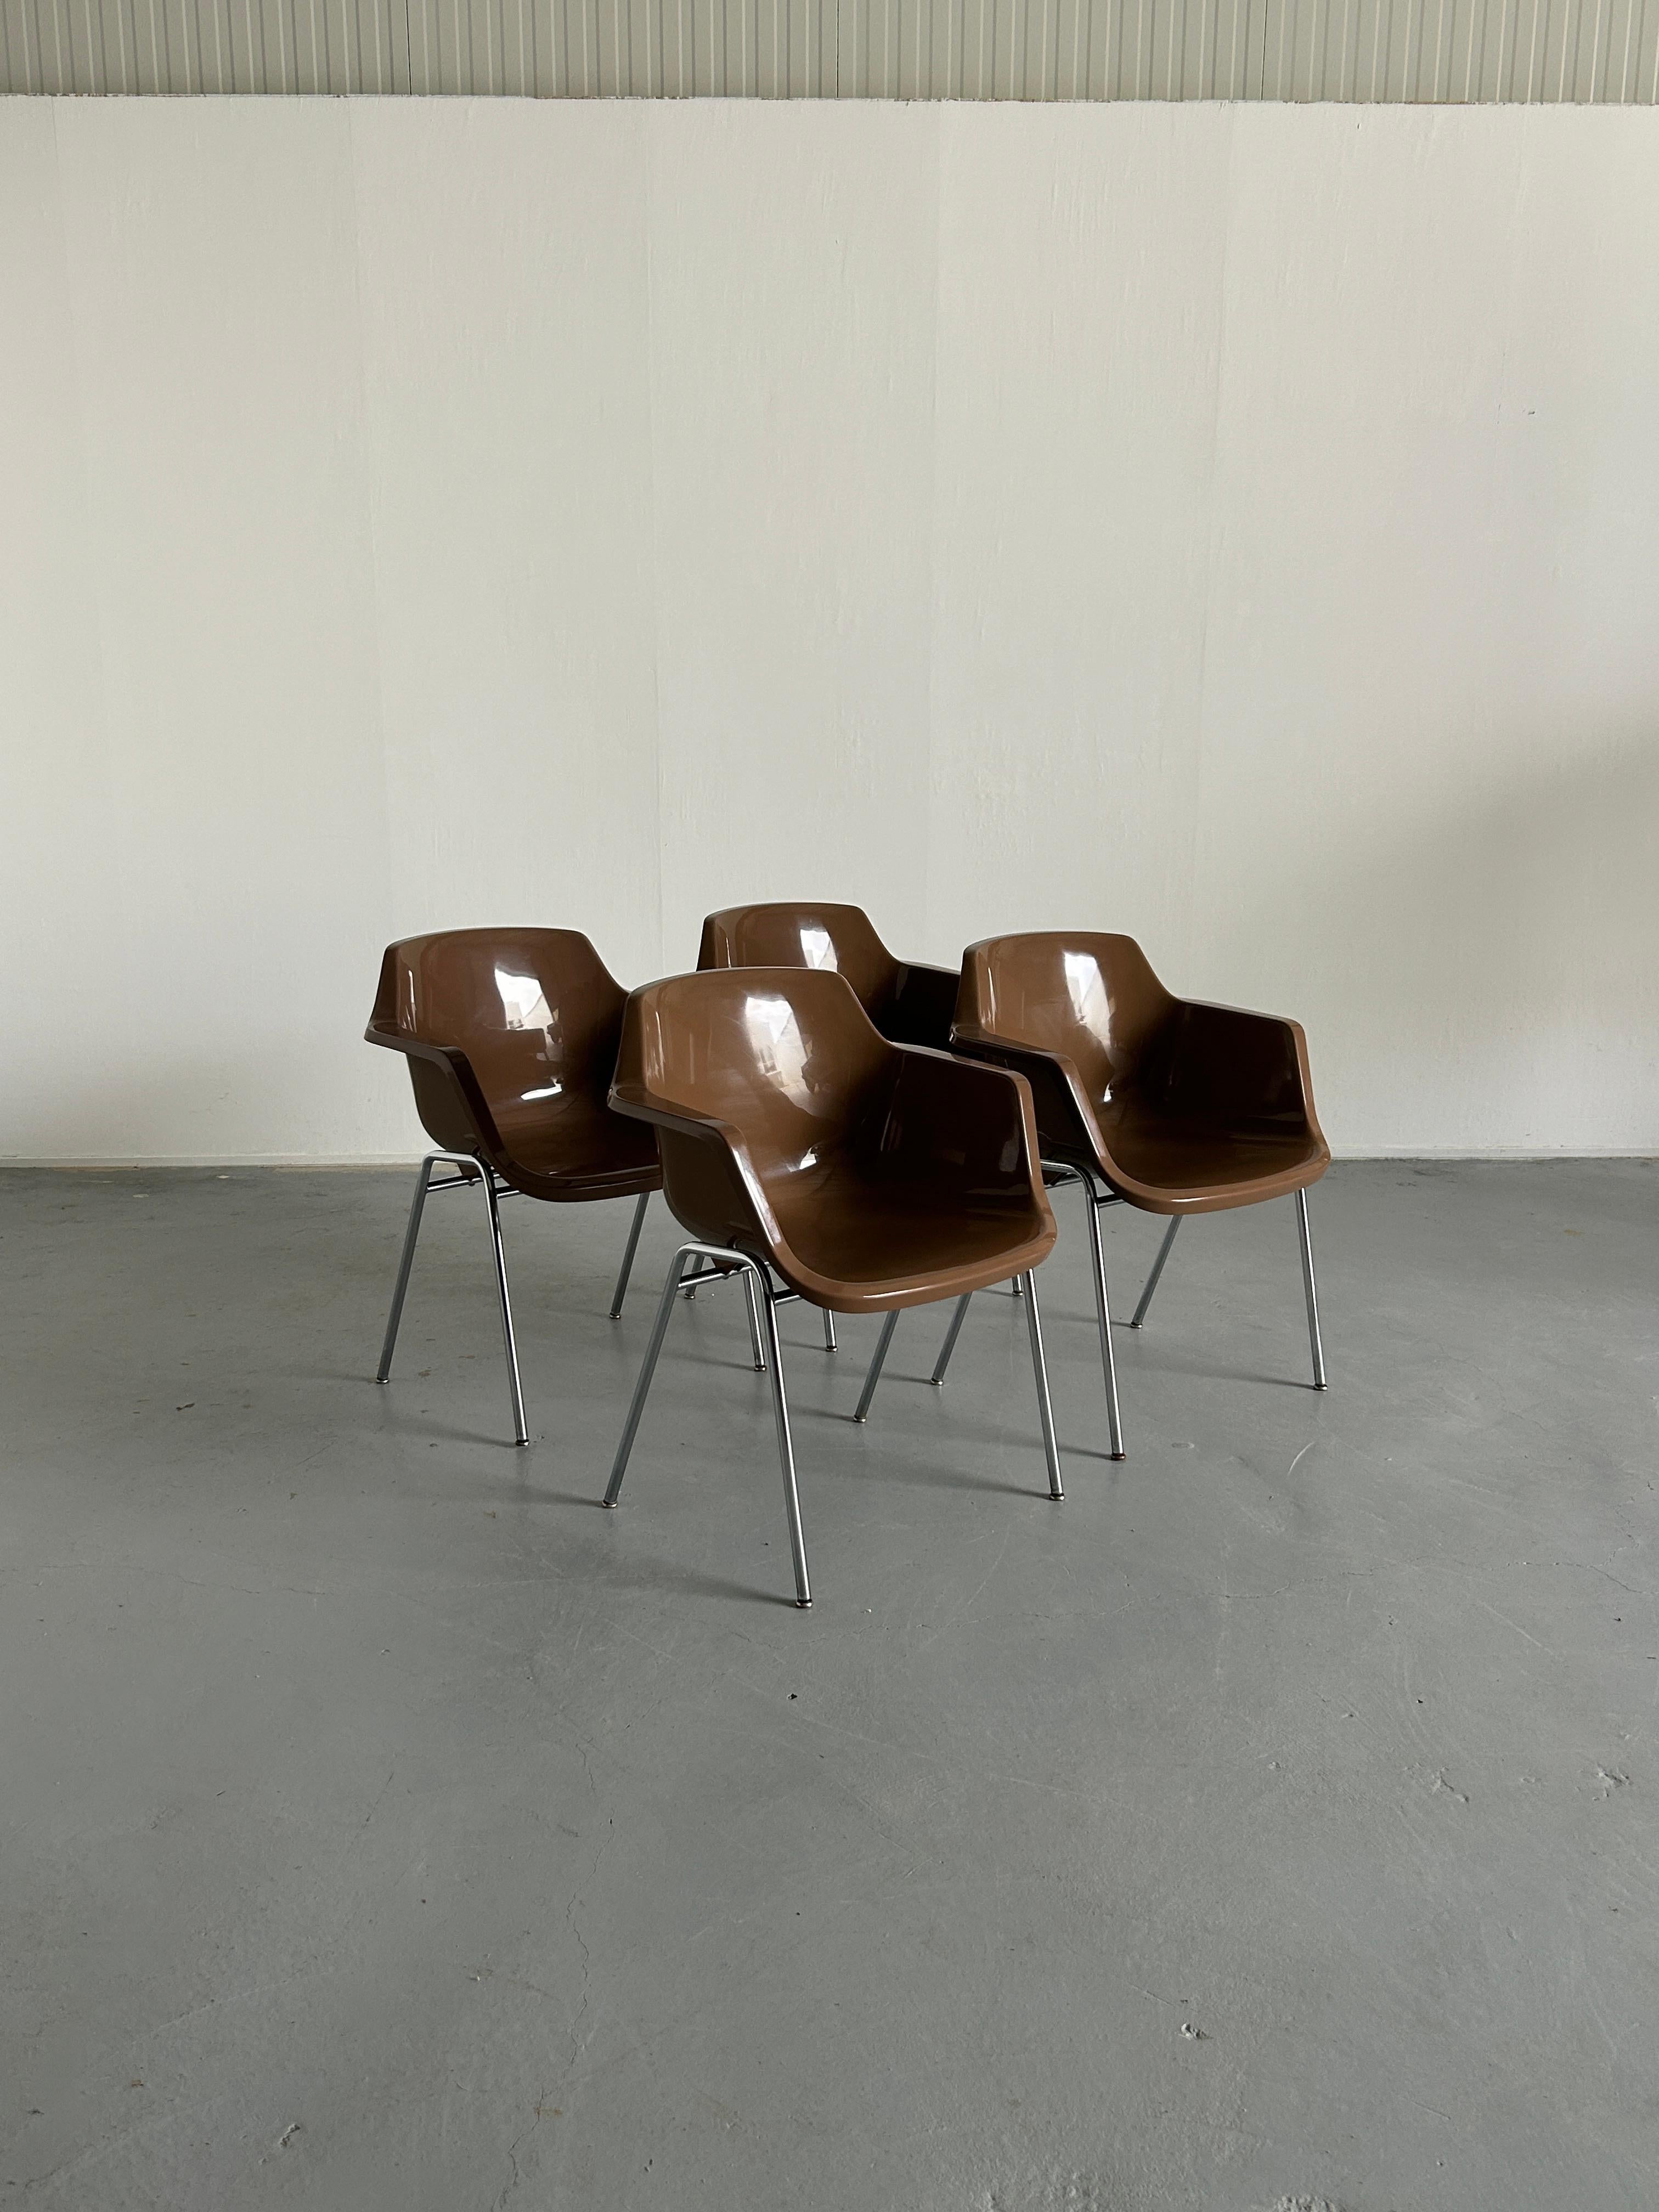 Four high-quality production Mid-century Modern dining chairs made from a chromed metal base and shell high-gloss brown plastic seat.
Produced in March, 1973 (engraved).

In good vintage condition with minimal expected signs of age, as indicated on